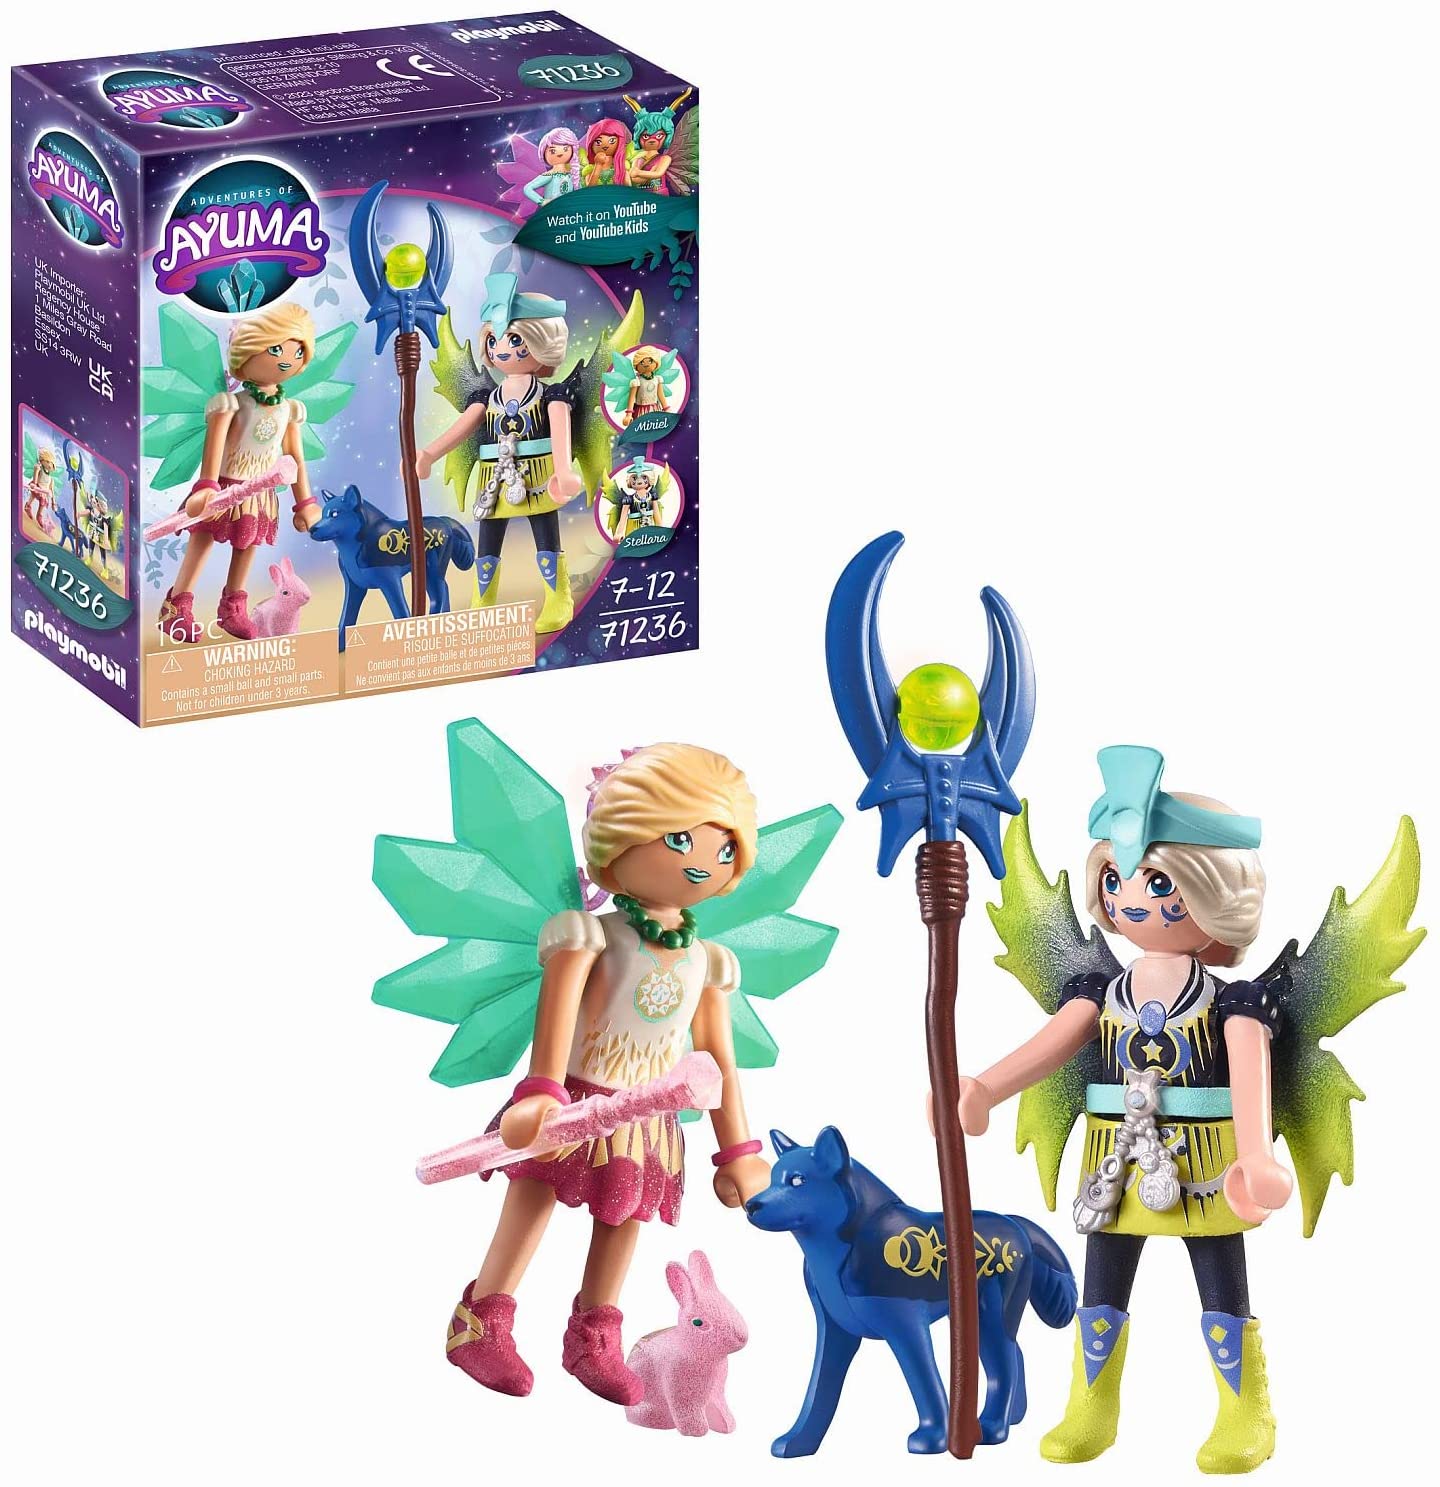 Playmobil Adventures of Ayuma 71236 Crystal and Moon Fairy with soul animals, toys for children from 7 years